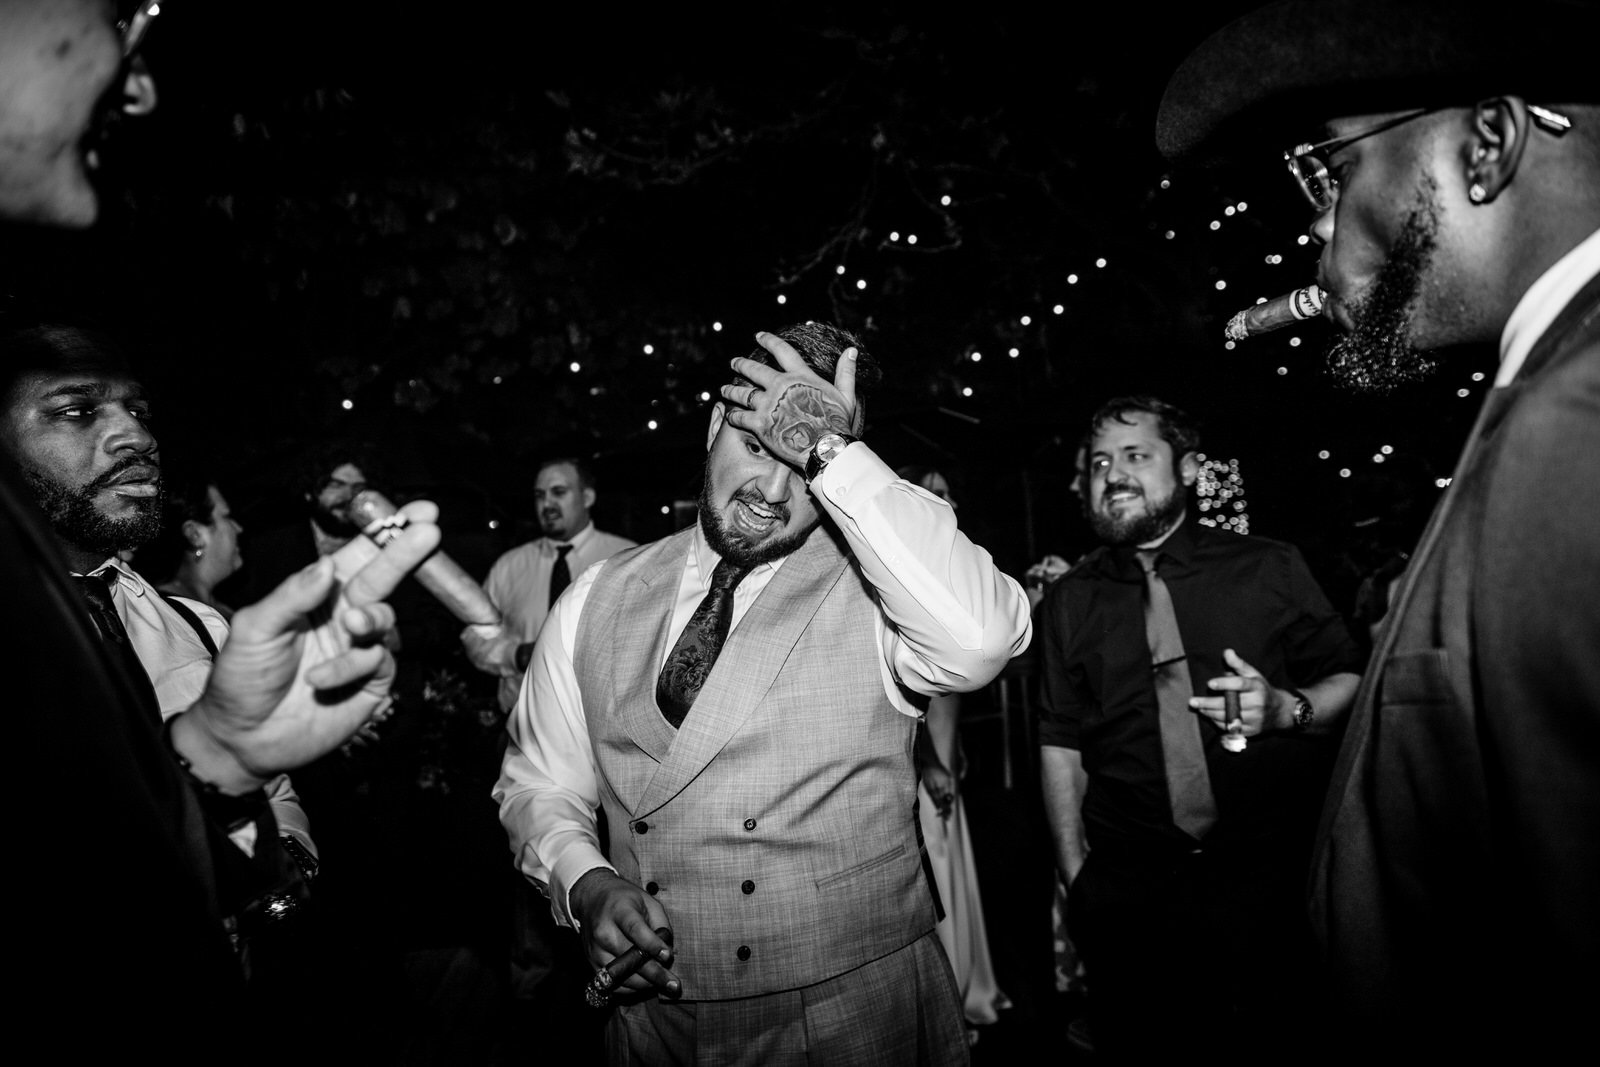 Ampersea_Baltimore_Maryland_Wedding_Suzanne&Andrew_Dance_Party-1578.jpg